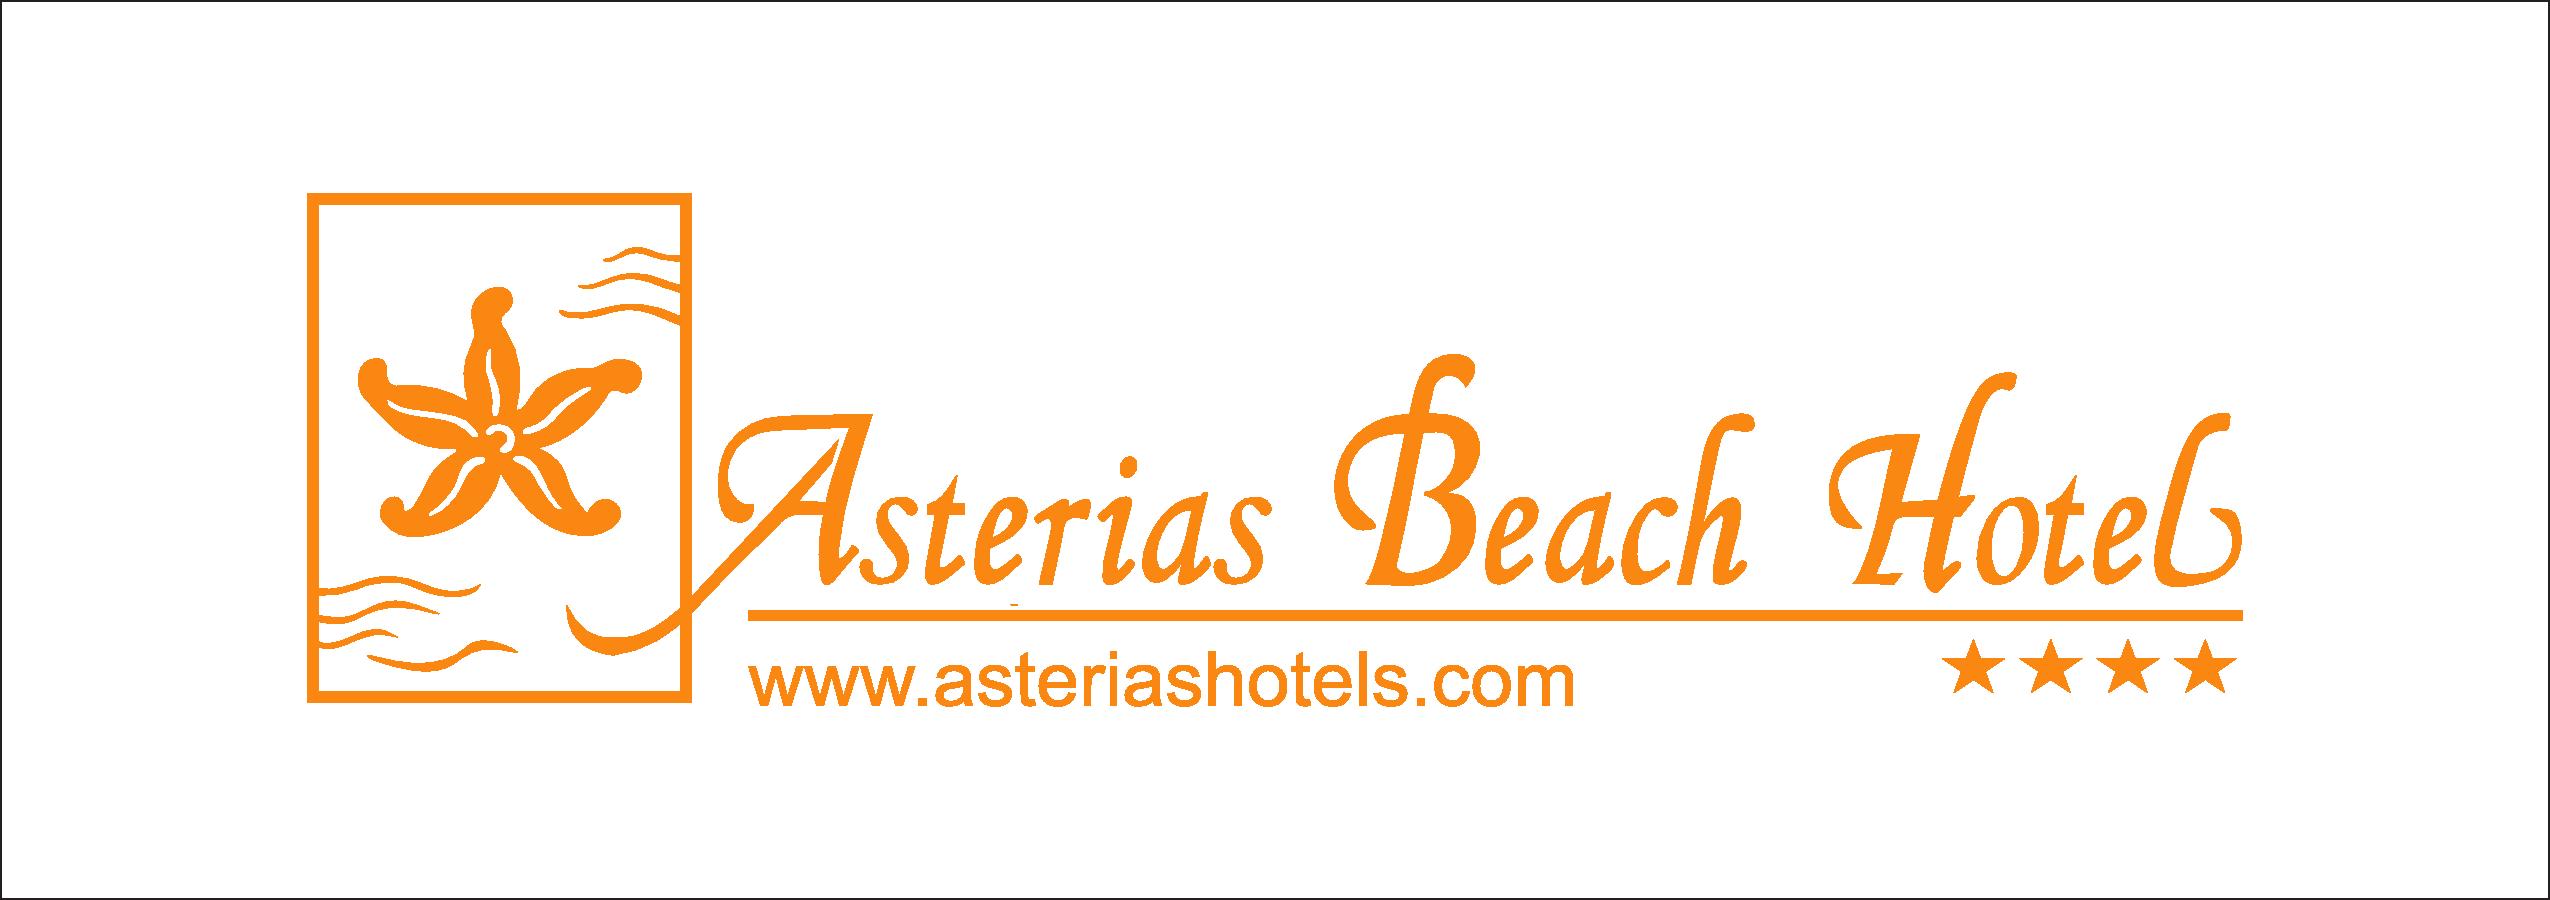 Guest Relations Officer - Ayia Napa